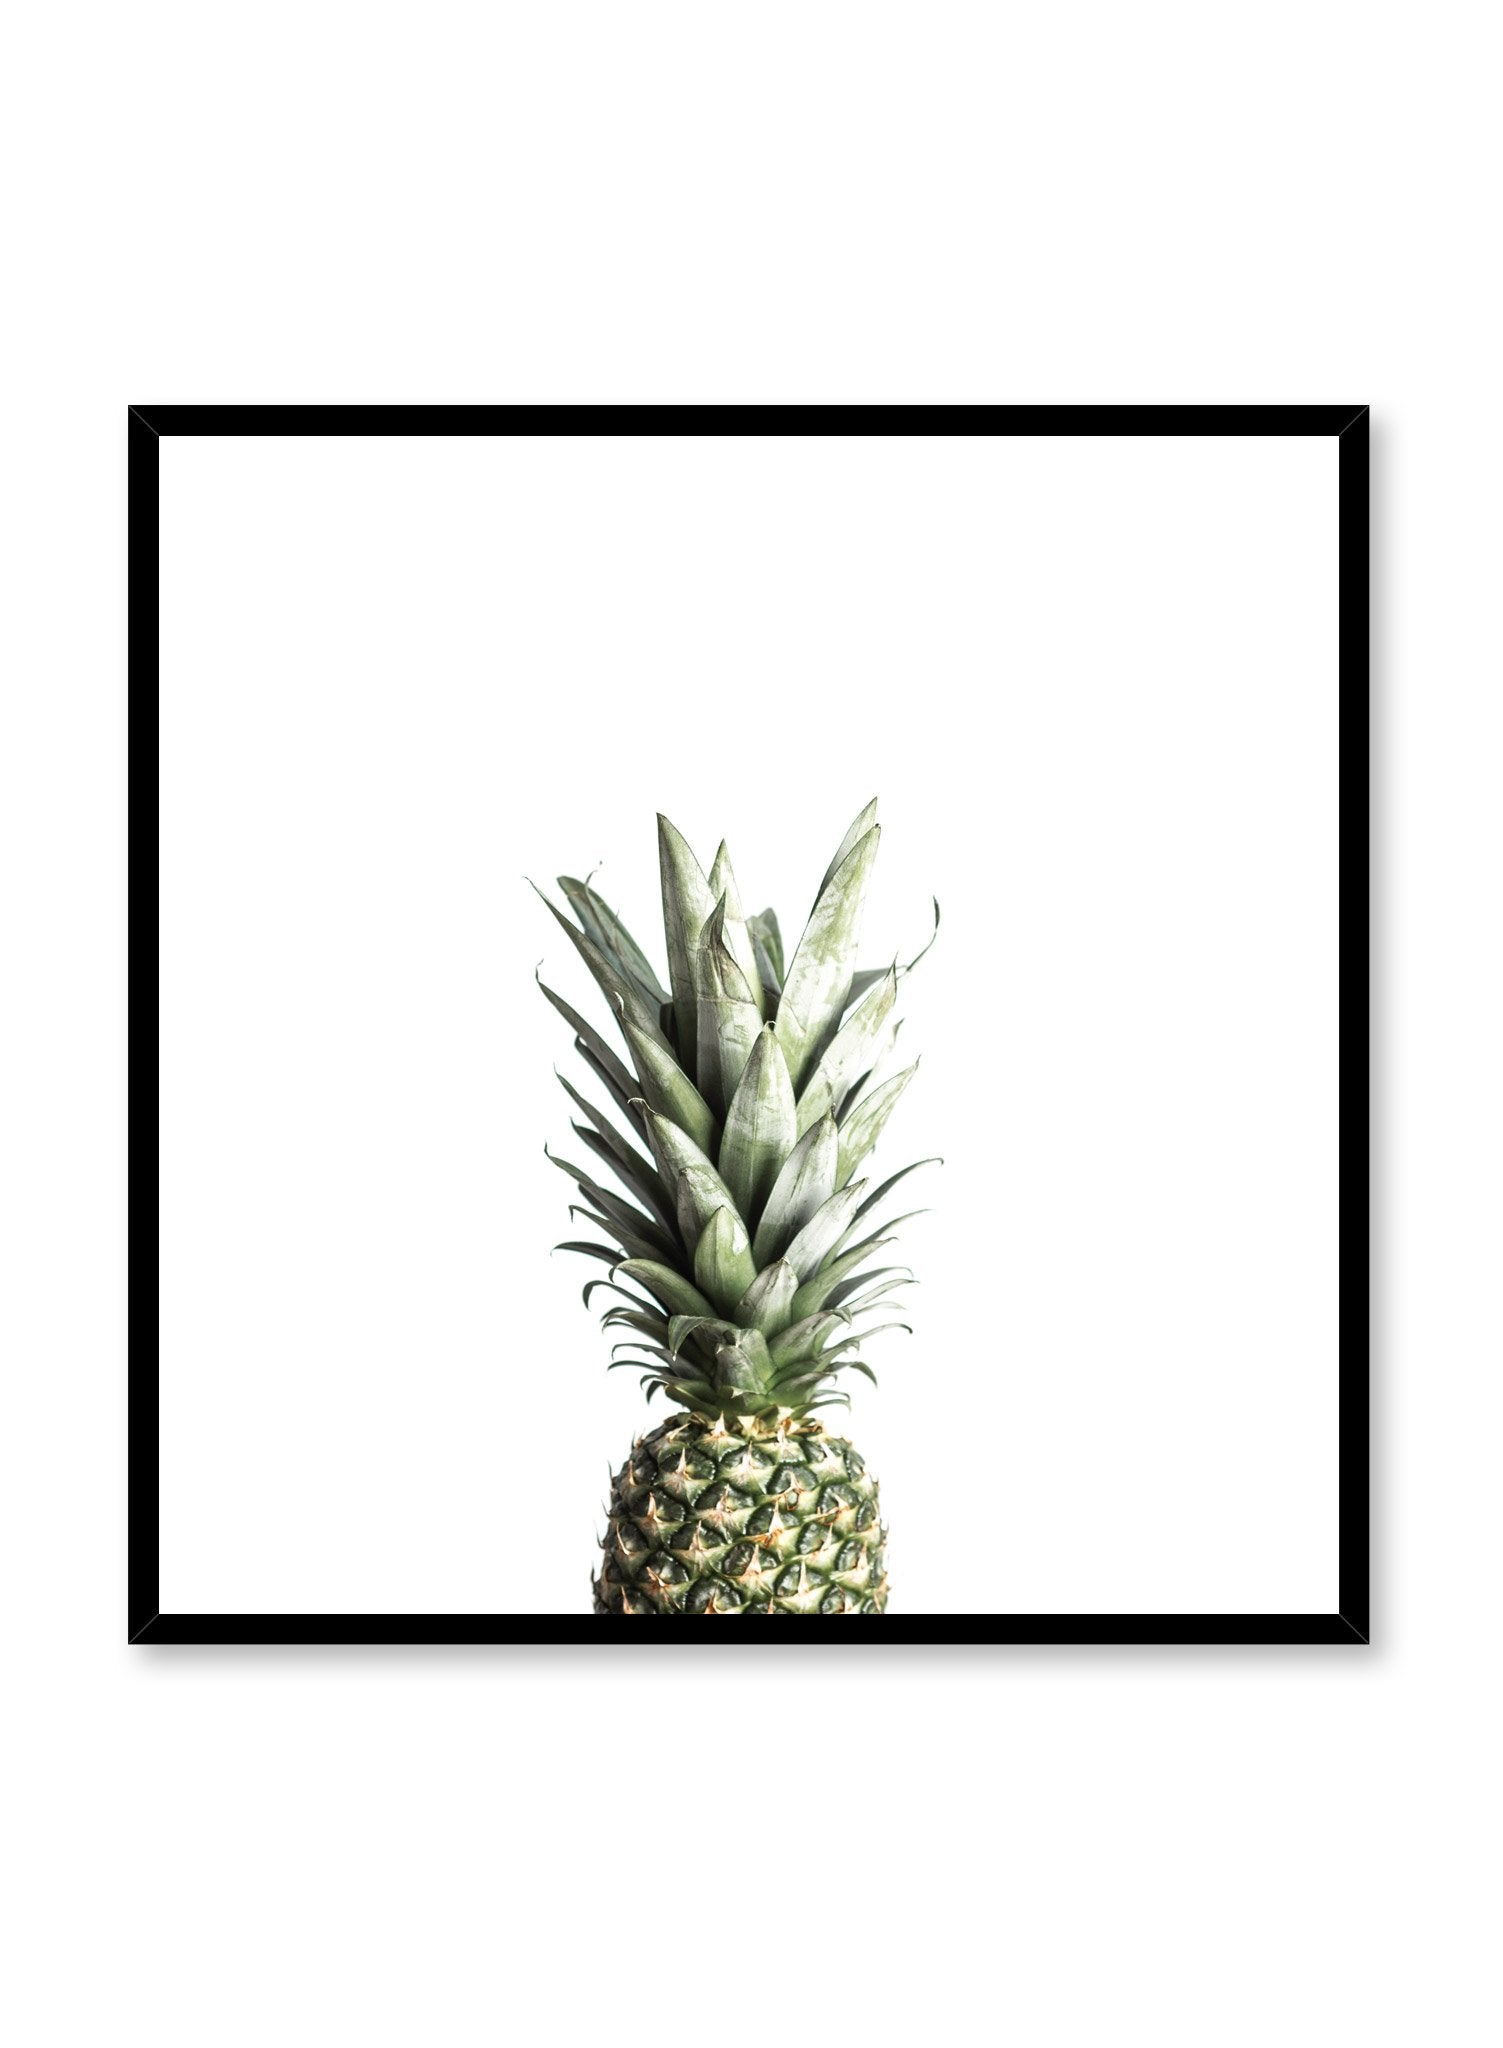 Scandinavian art print by Opposite Wall with Welcomeness pineapple art photo in square format